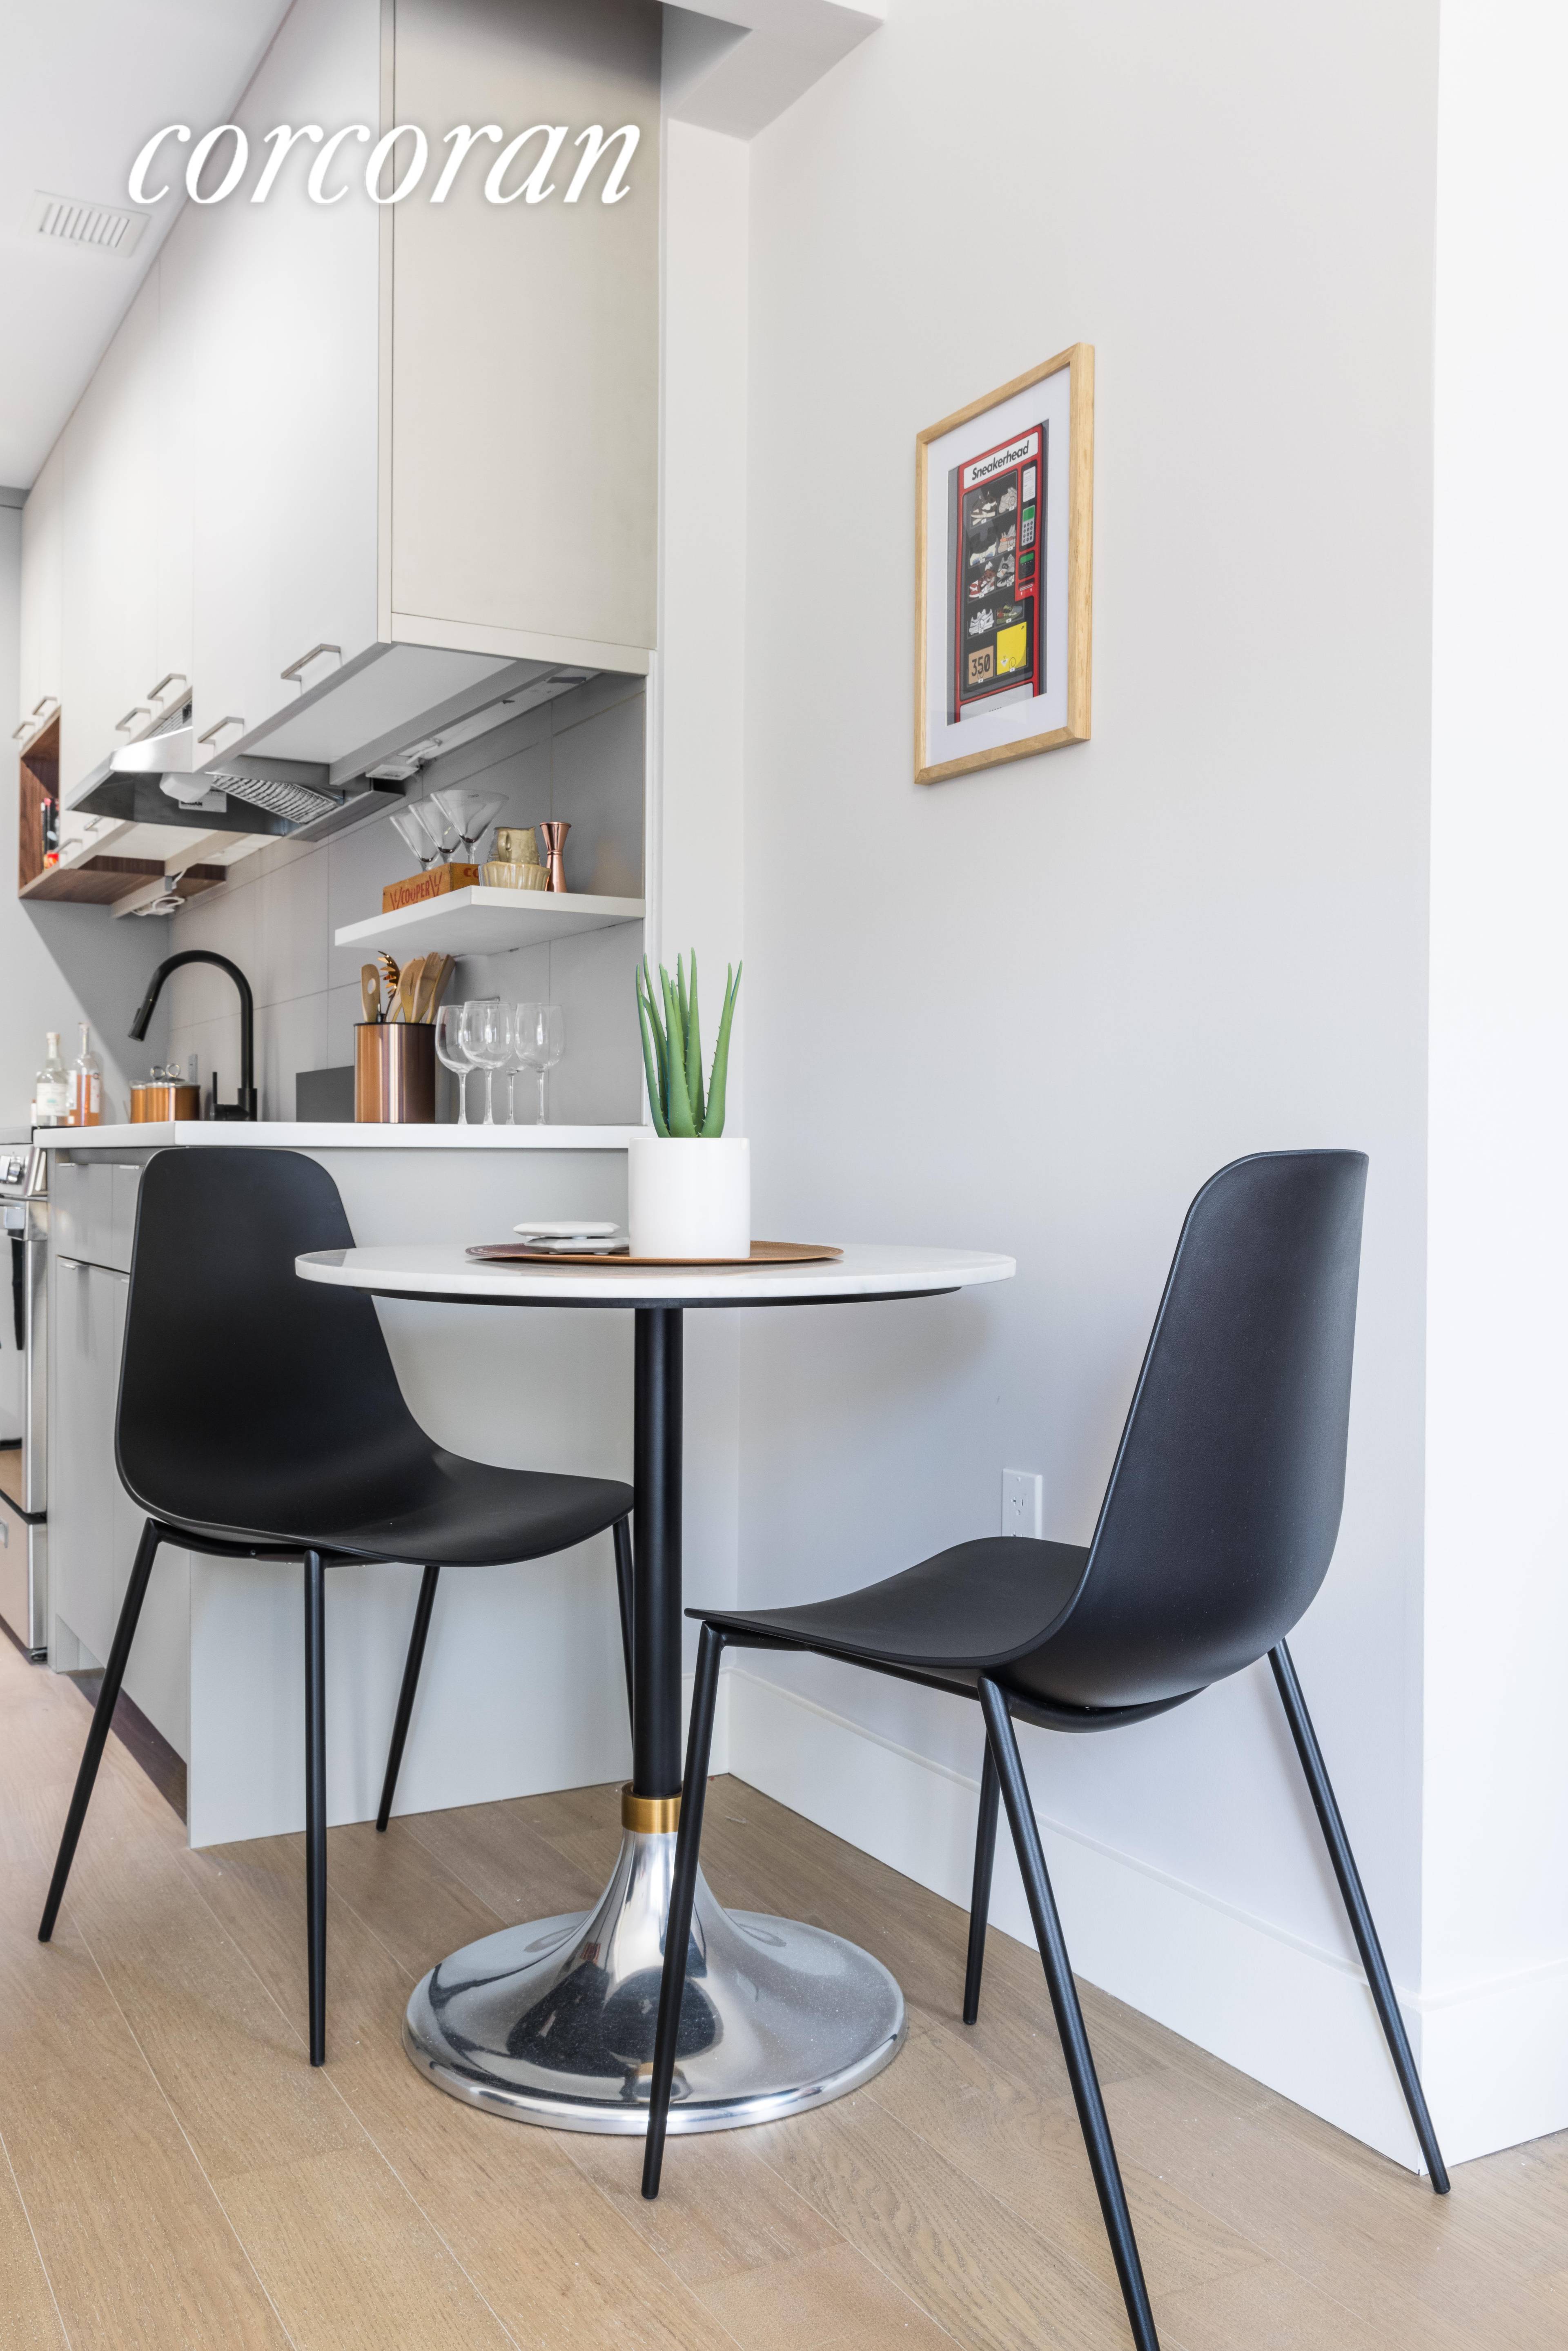 A Home Not Just an Apartment The Strand offers four stories of flexible living options, from efficient well planned studios, sprawling one bedrooms, the perfect convertible home office two bedrooms ...